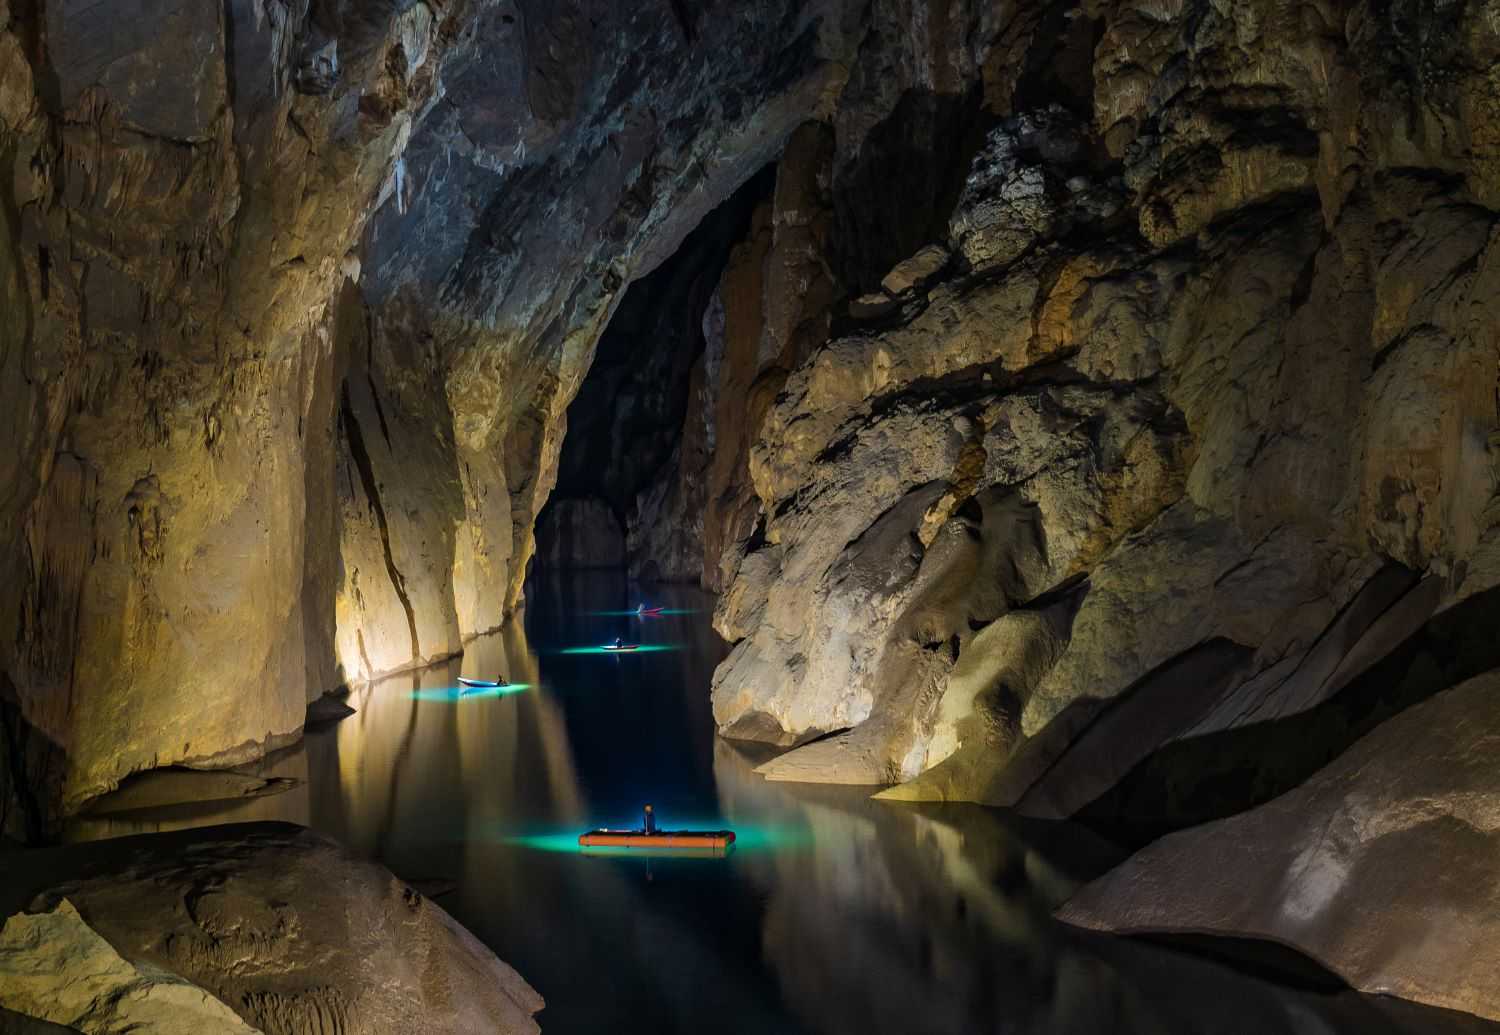 The World’s Top 5 Underground Rivers and Caves to Visit